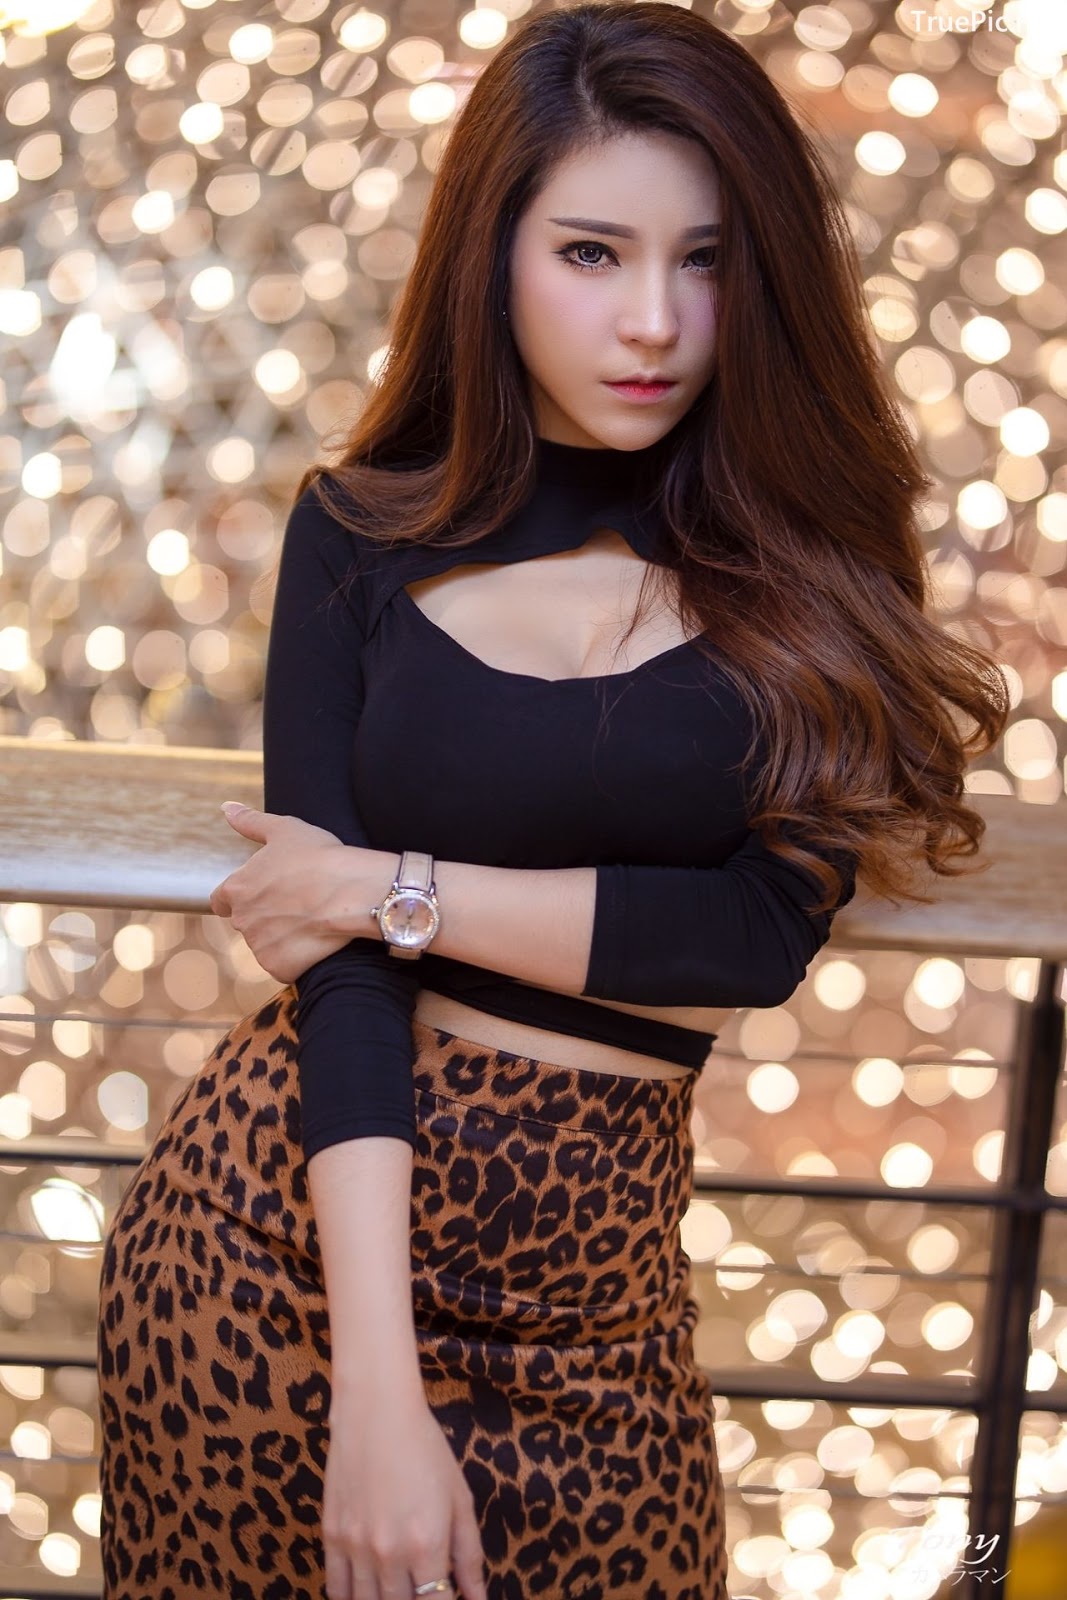 Image-Thailand-Hot-Model-Janet-Kanokwan-Saesim-Sexy-In-Black-And-Leopard-Fabric-TruePic.net- Picture-19